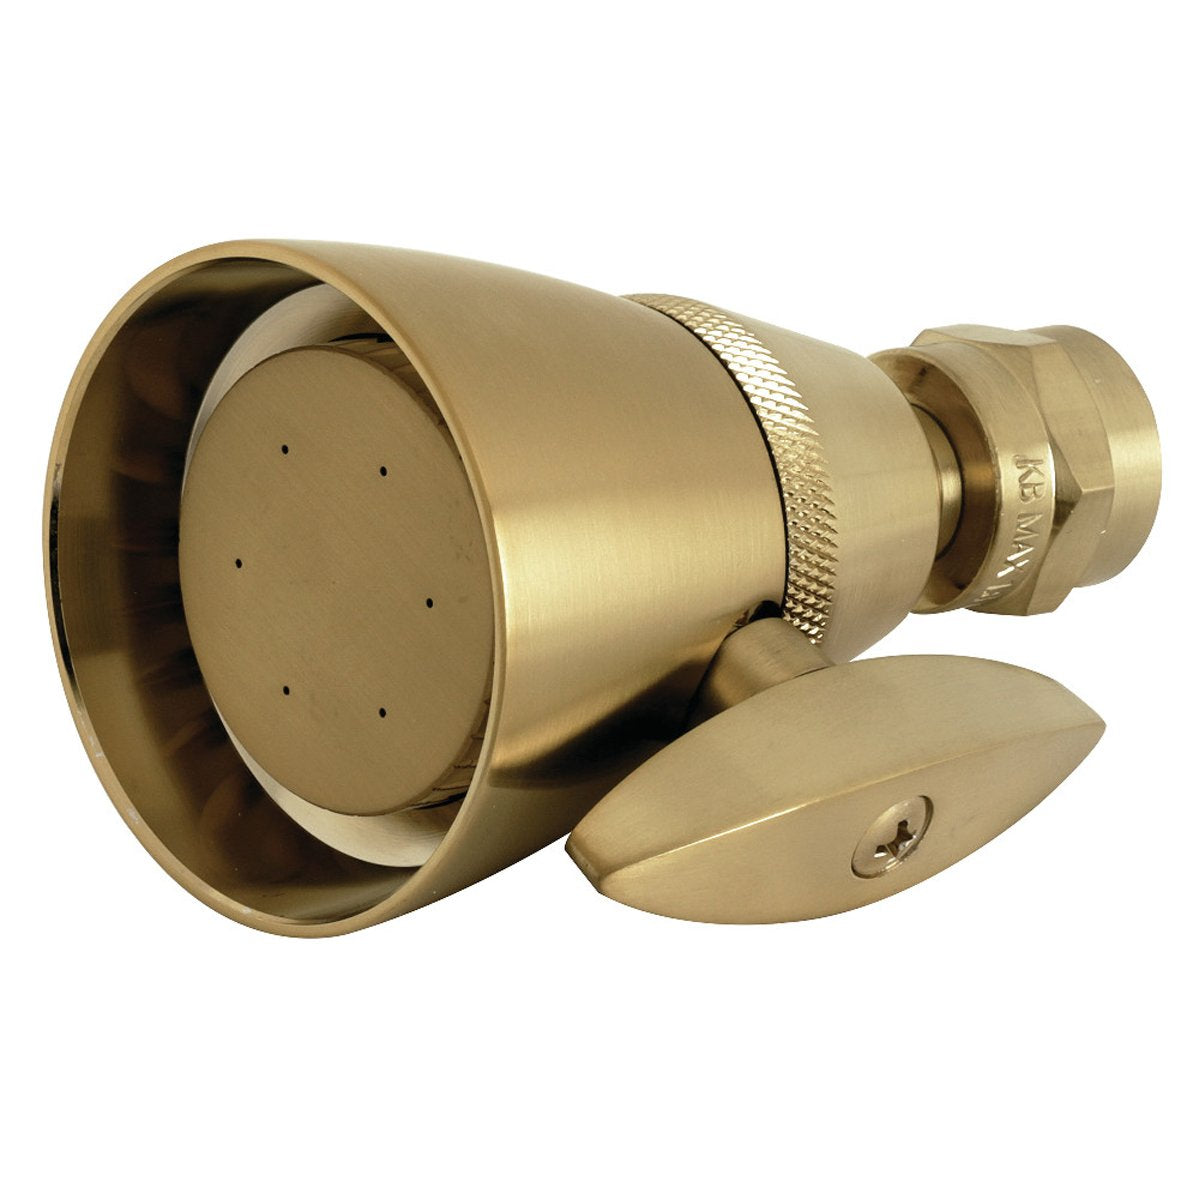 Kingston Brass Made to Match 2-1/4" O.D. Adjustable Shower Head